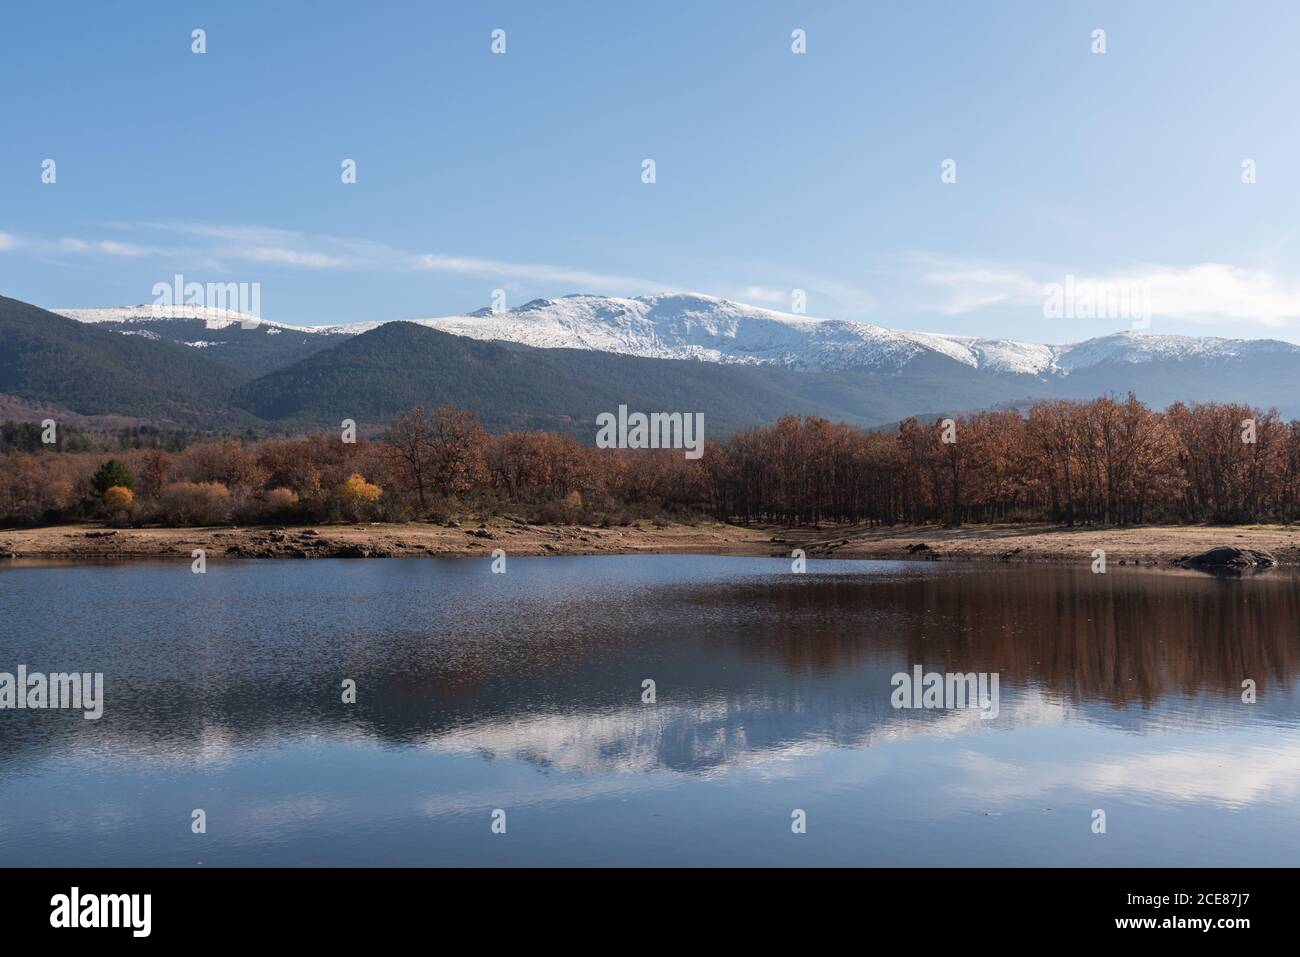 Shore of calm river against snowy autumn mountain ridge and cloudy sky in nature Stock Photo